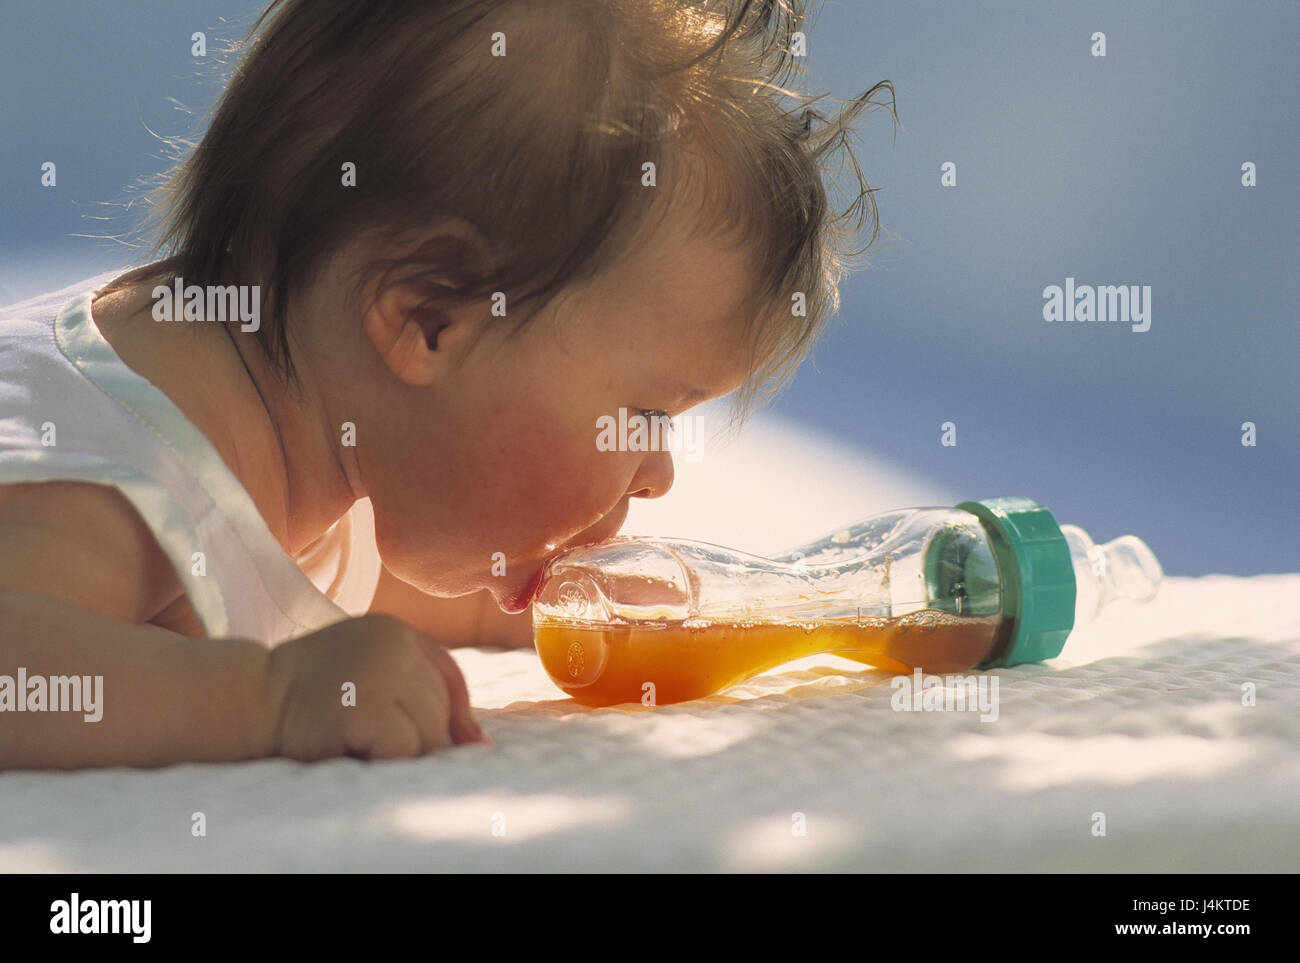 Baby, lie, baby's bottle, drinking attempt, portrait, at the side outside, summer, child, infant, abdominal position, clumsy, mouth, flask, drinking flask Stock Photo